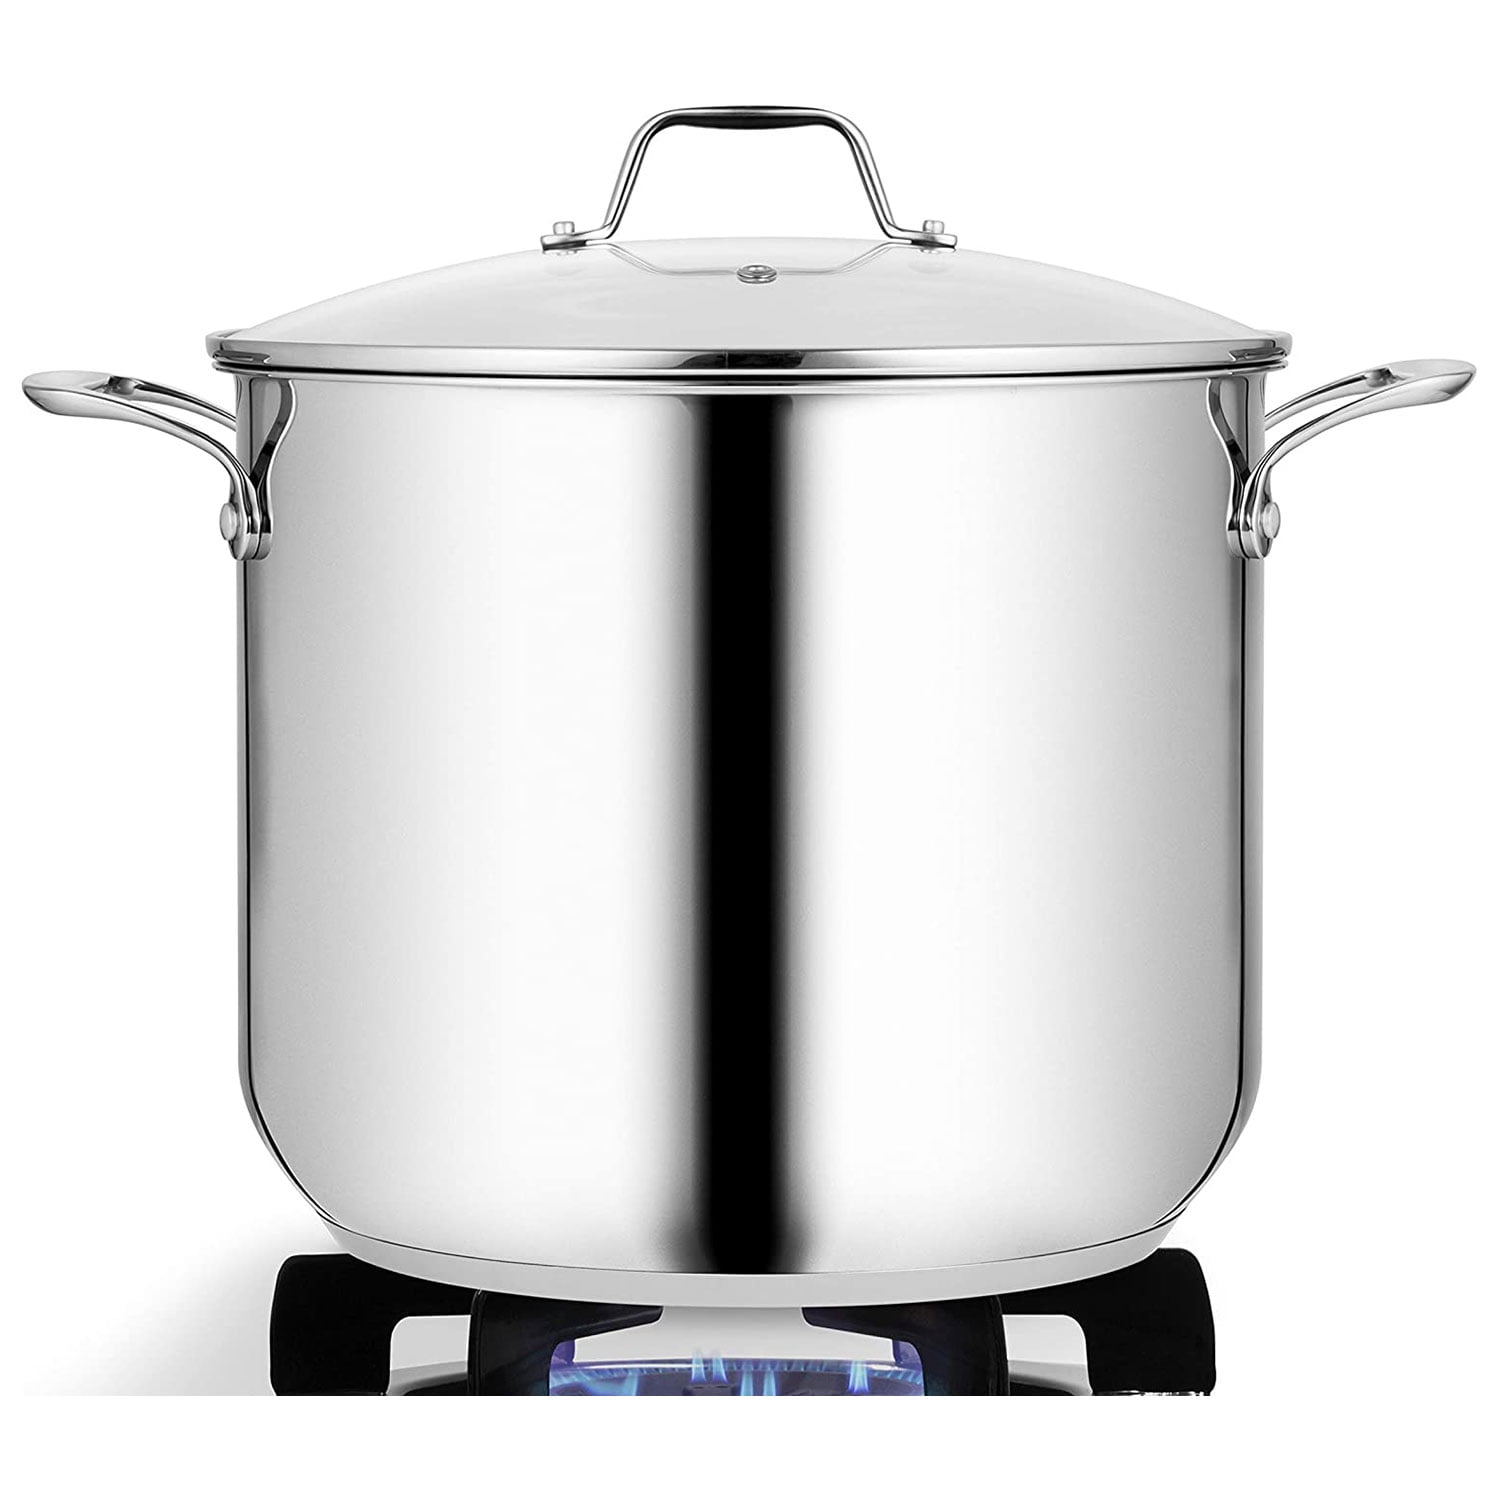 Oster Adenmore 12 Quart Stainless Steel Stock Pot With Tempered